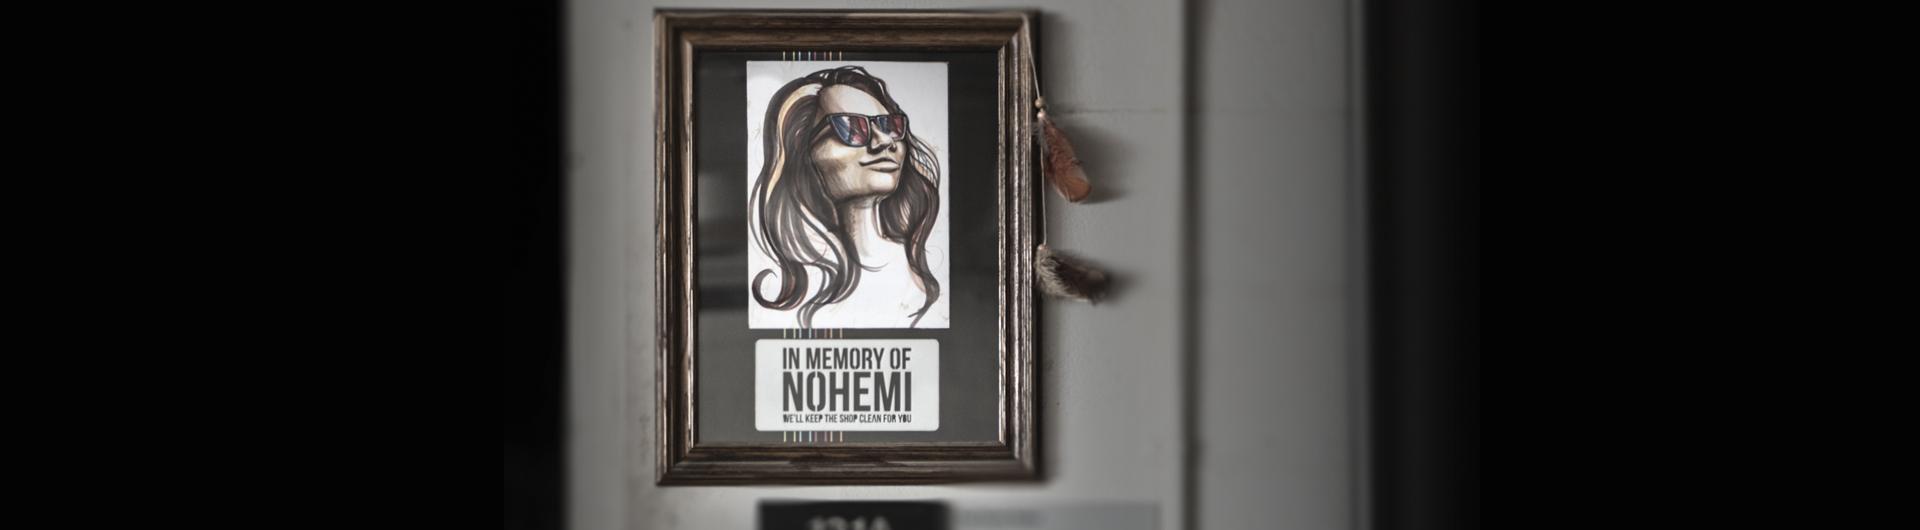 A framed portrait and laser cut sign created in memory of Nohemi Gonzalez hangs in one of the shops in the Design Department. Industrial design student Alyssa Staykow drew the portrait and Gonzalez’s principal mentor and instructor Matias Ocaña designed t